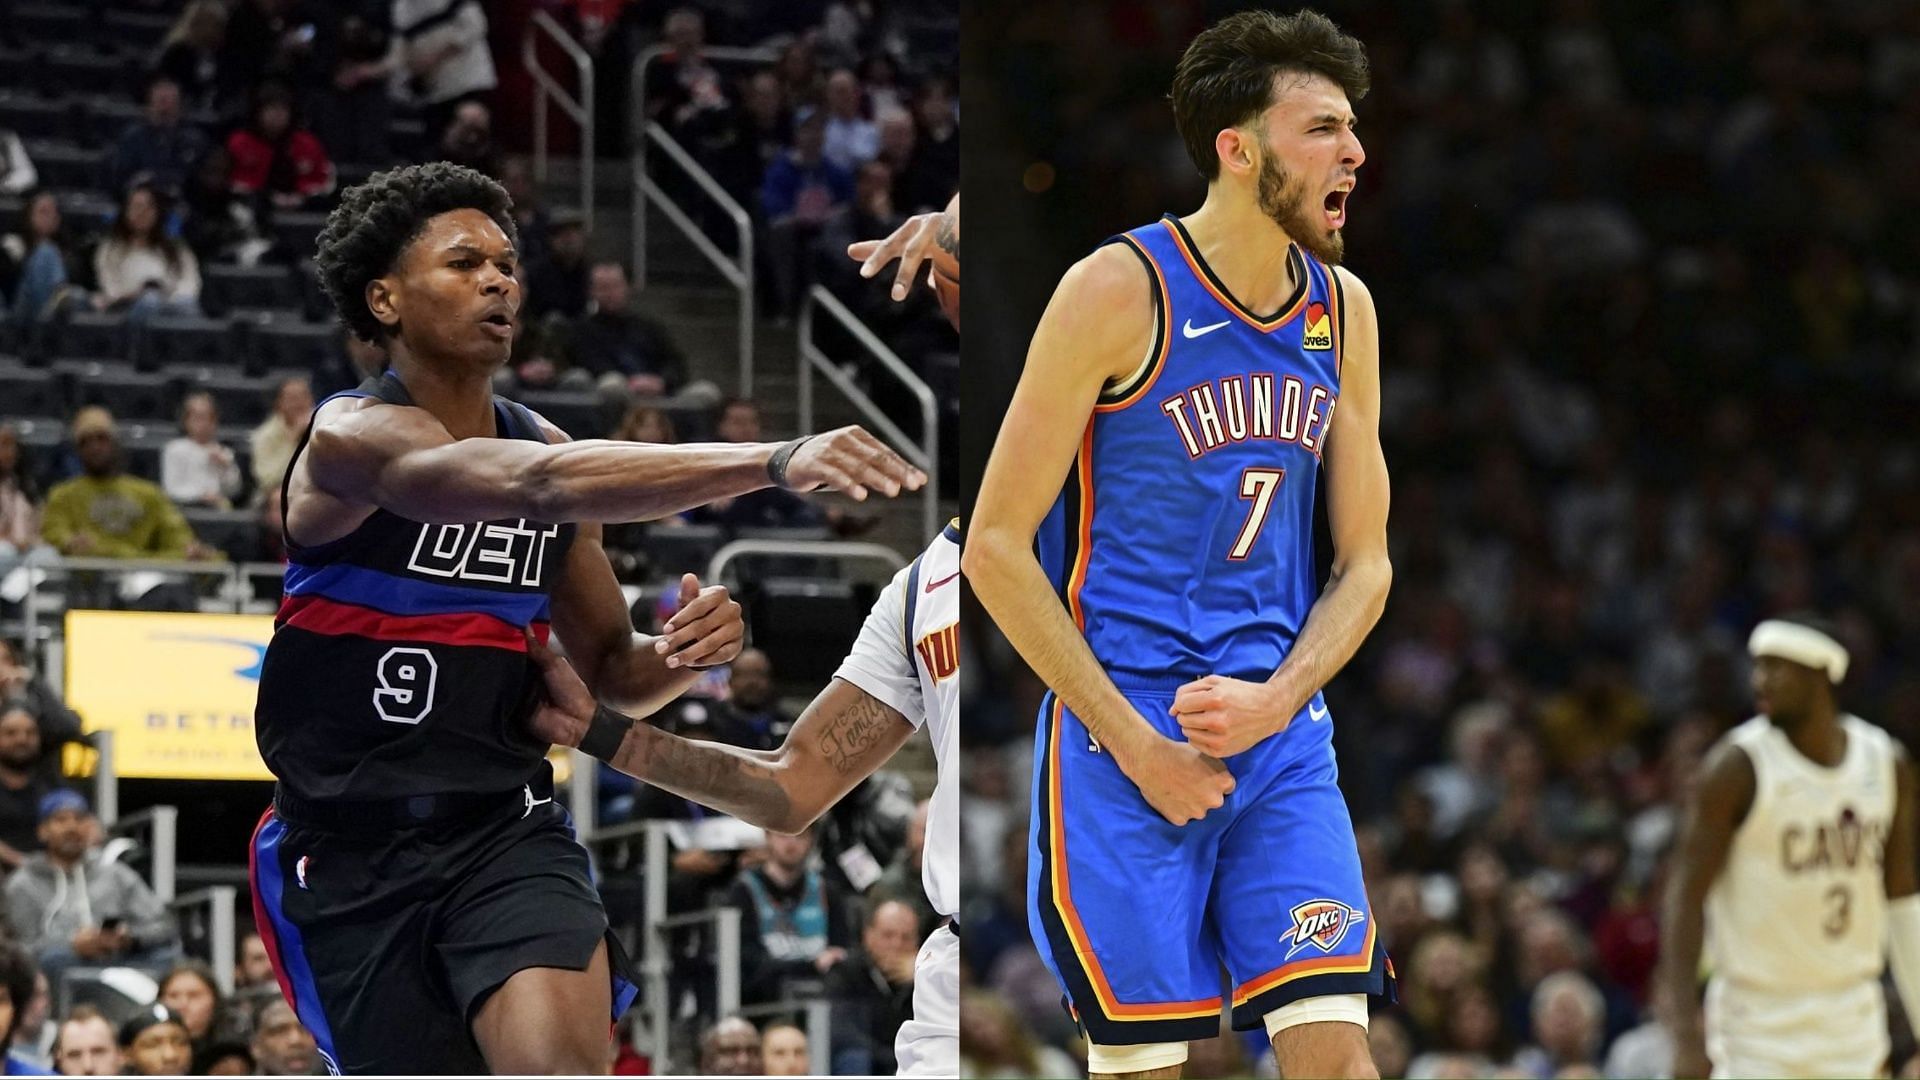 Top 5 candidates for the NBA ROY award so far (Week 6)